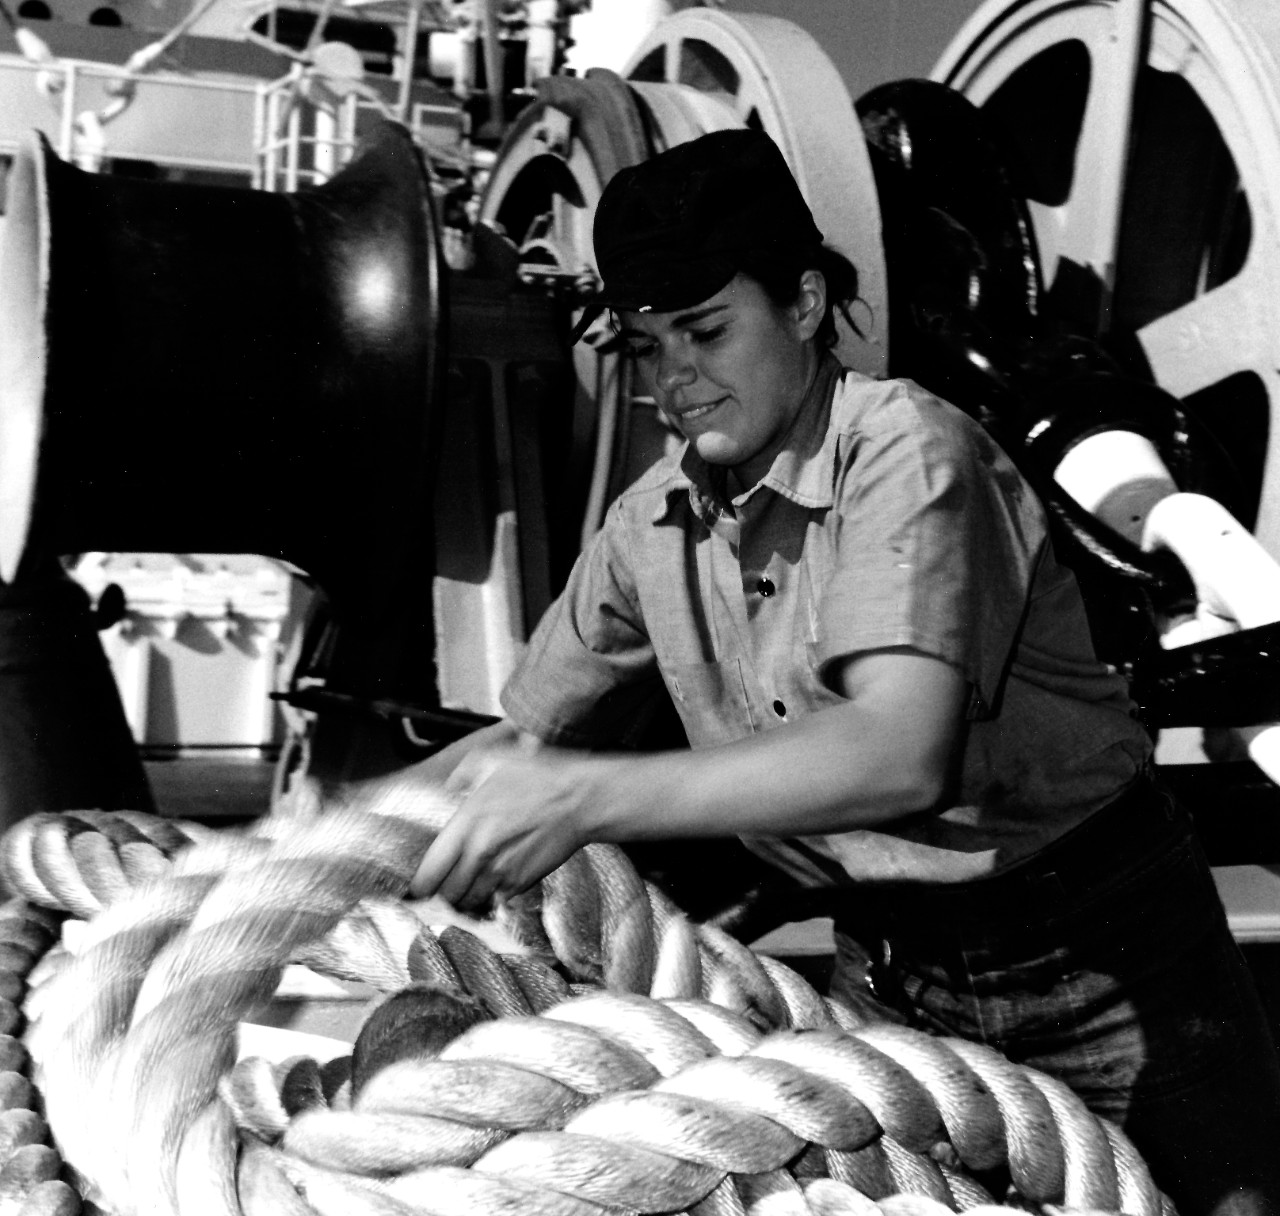 KN-21394:   Seaman Anneliese Knapp, February 1974.   Seaman Knapp unravels line from a bitt aboard the hospital ship, USS Sanctuary (AH-17).   Photographed by PH3 L.D. Anderson.   Official U.S. Navy photograph, now in the collections of the National Archives.  Black and white image only.  